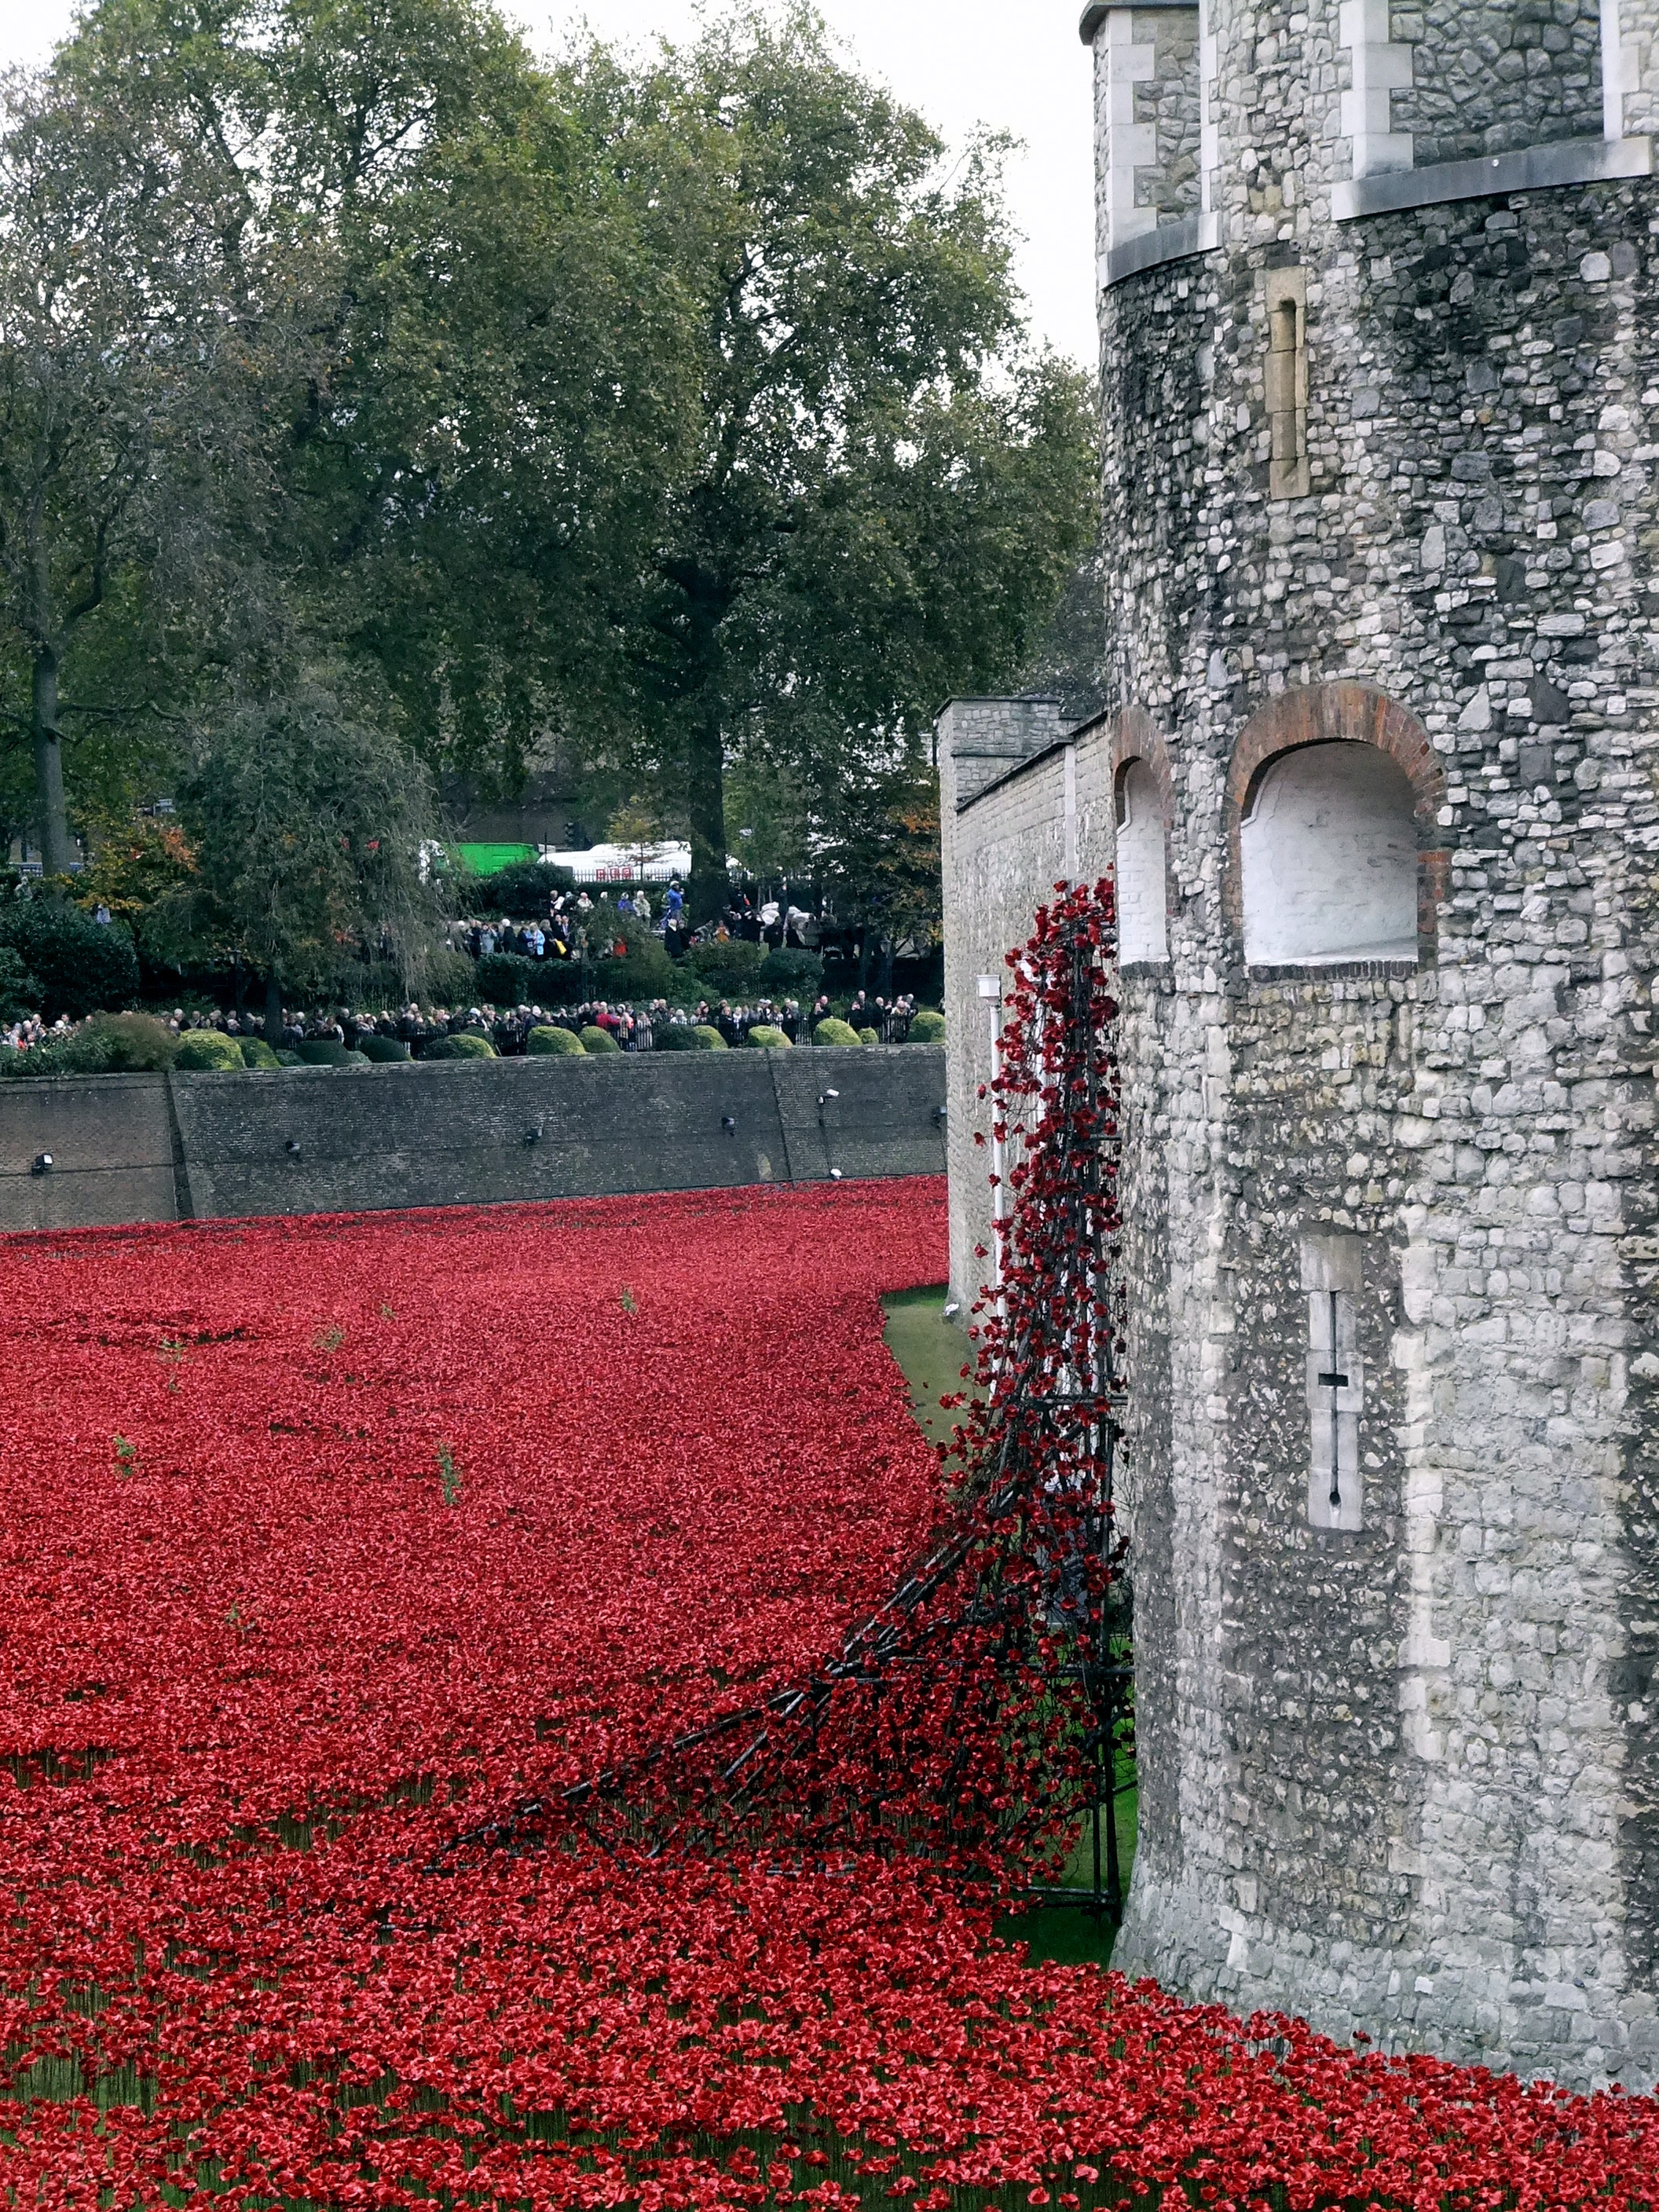 Poppies tumbling out of The Tower, like a broken blood vessel